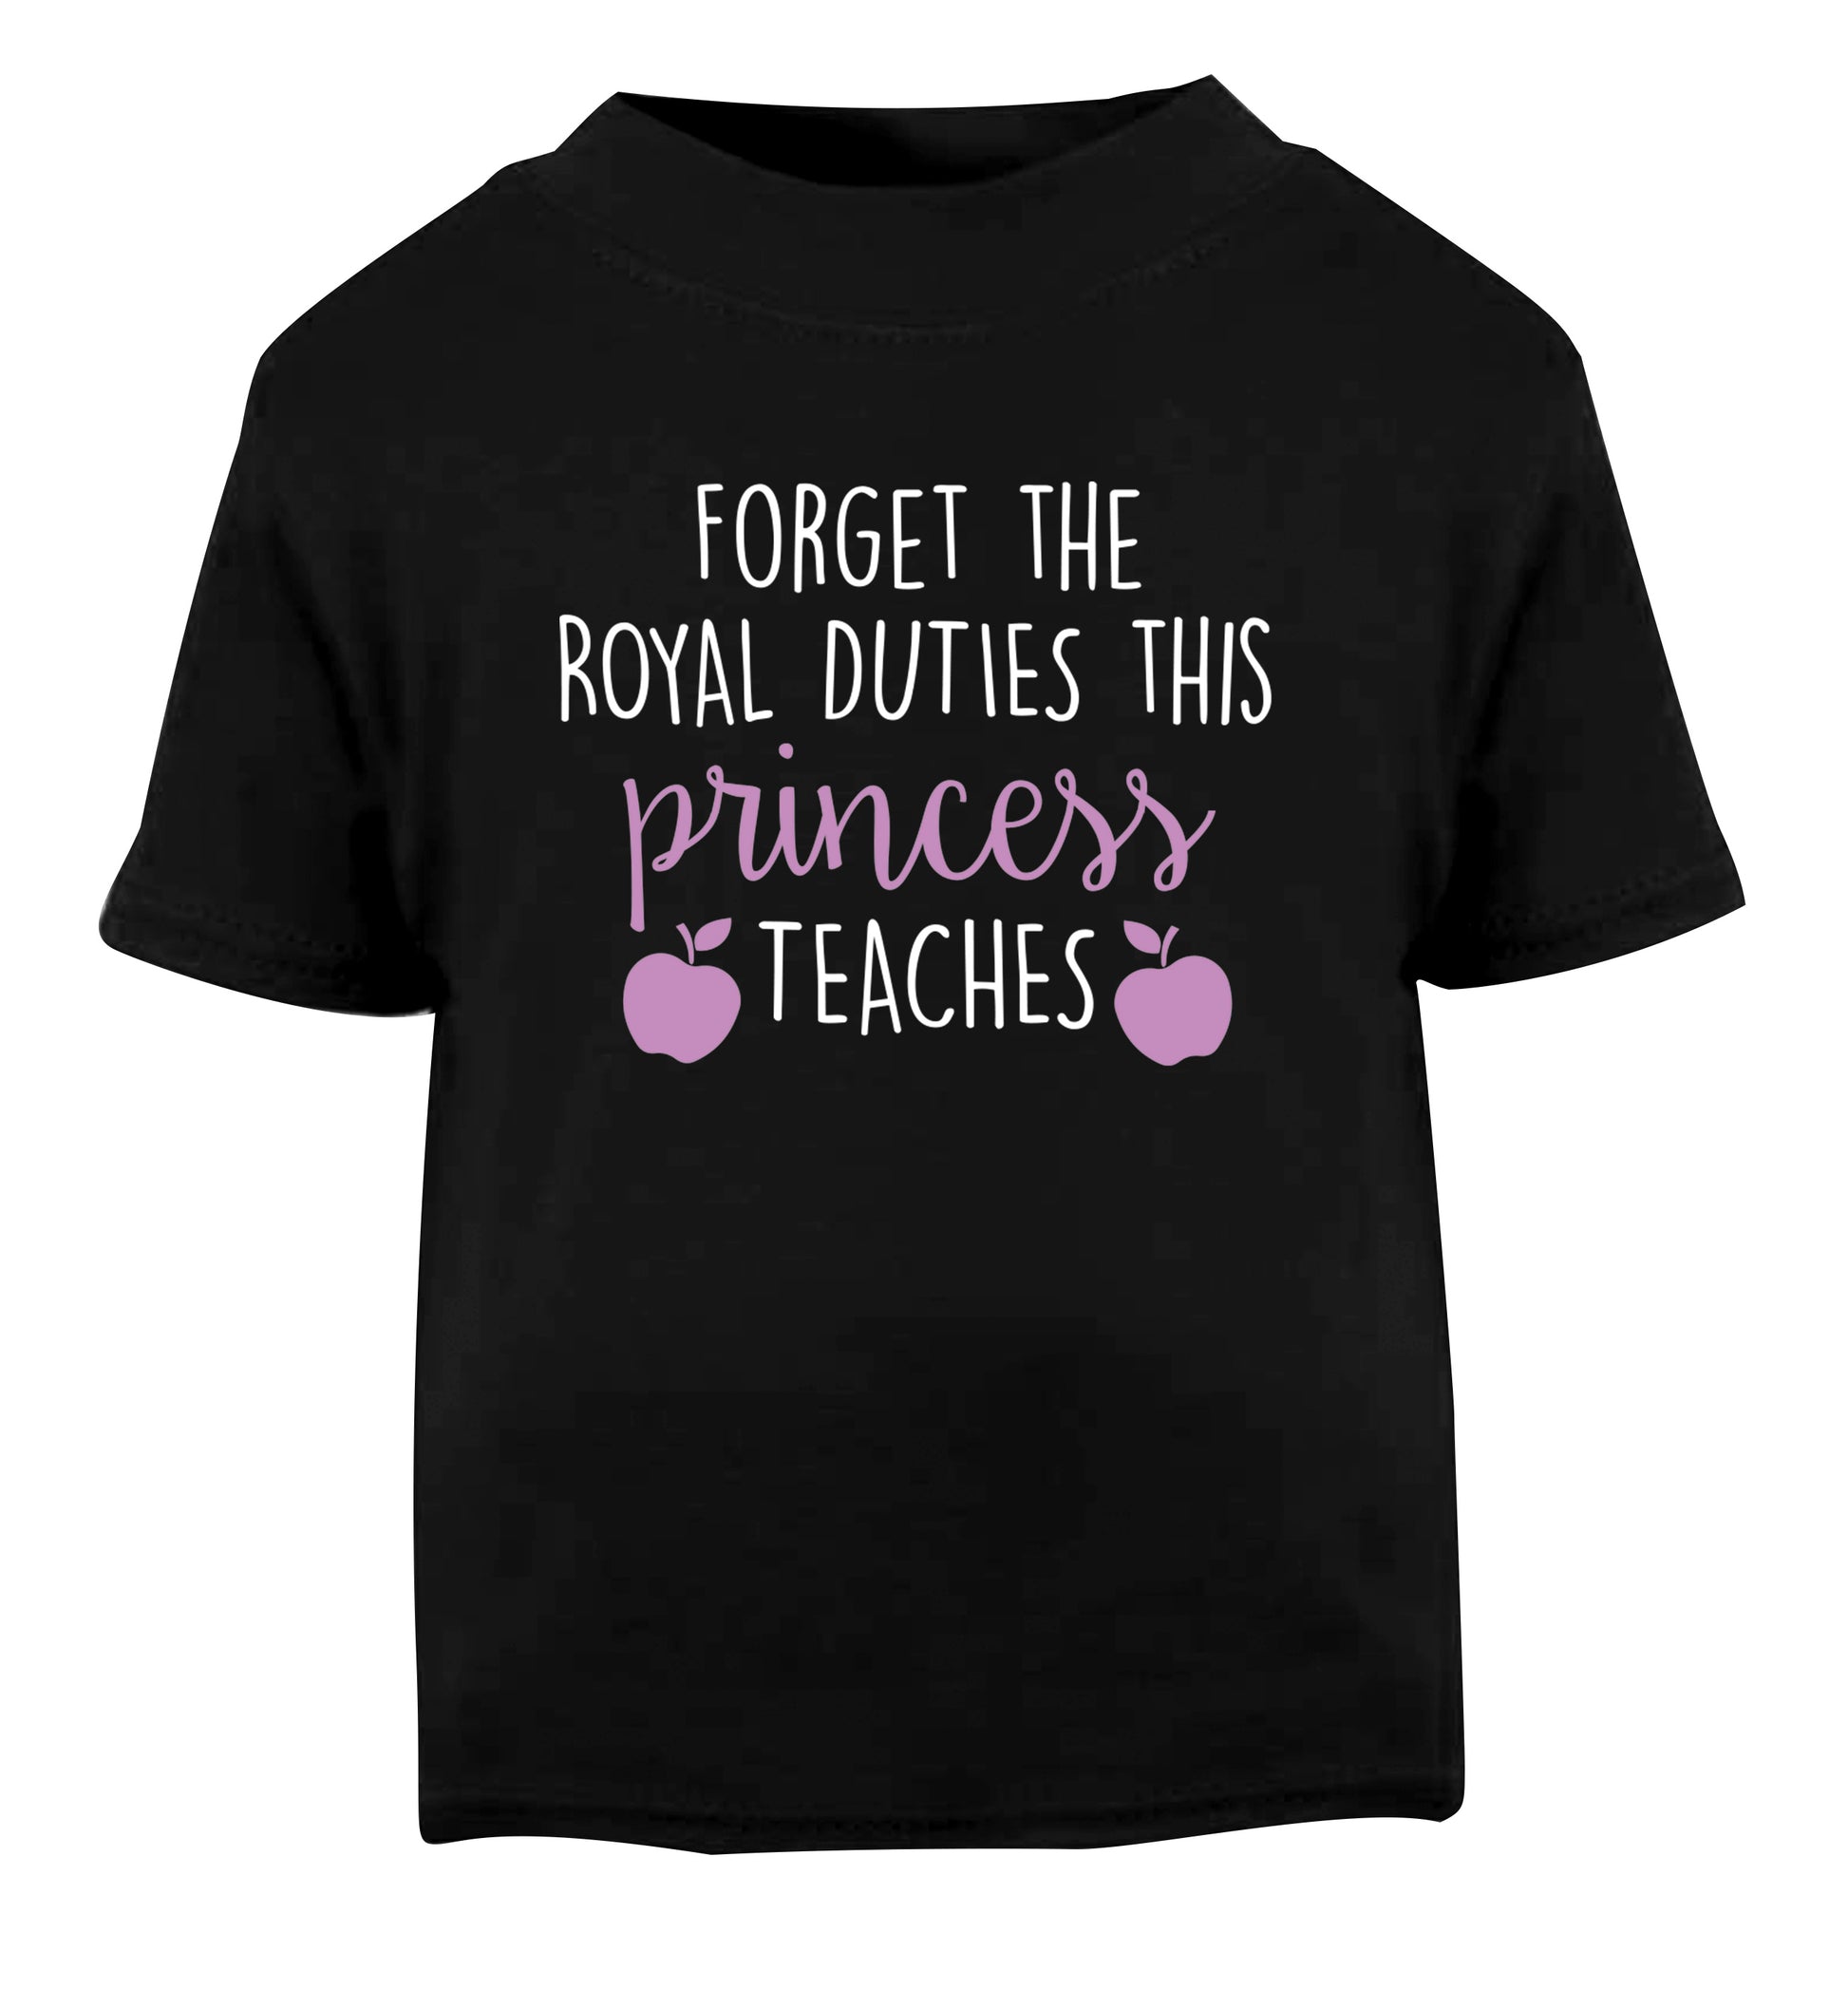 Forget the royal duties this princess teaches Black Baby Toddler Tshirt 2 years